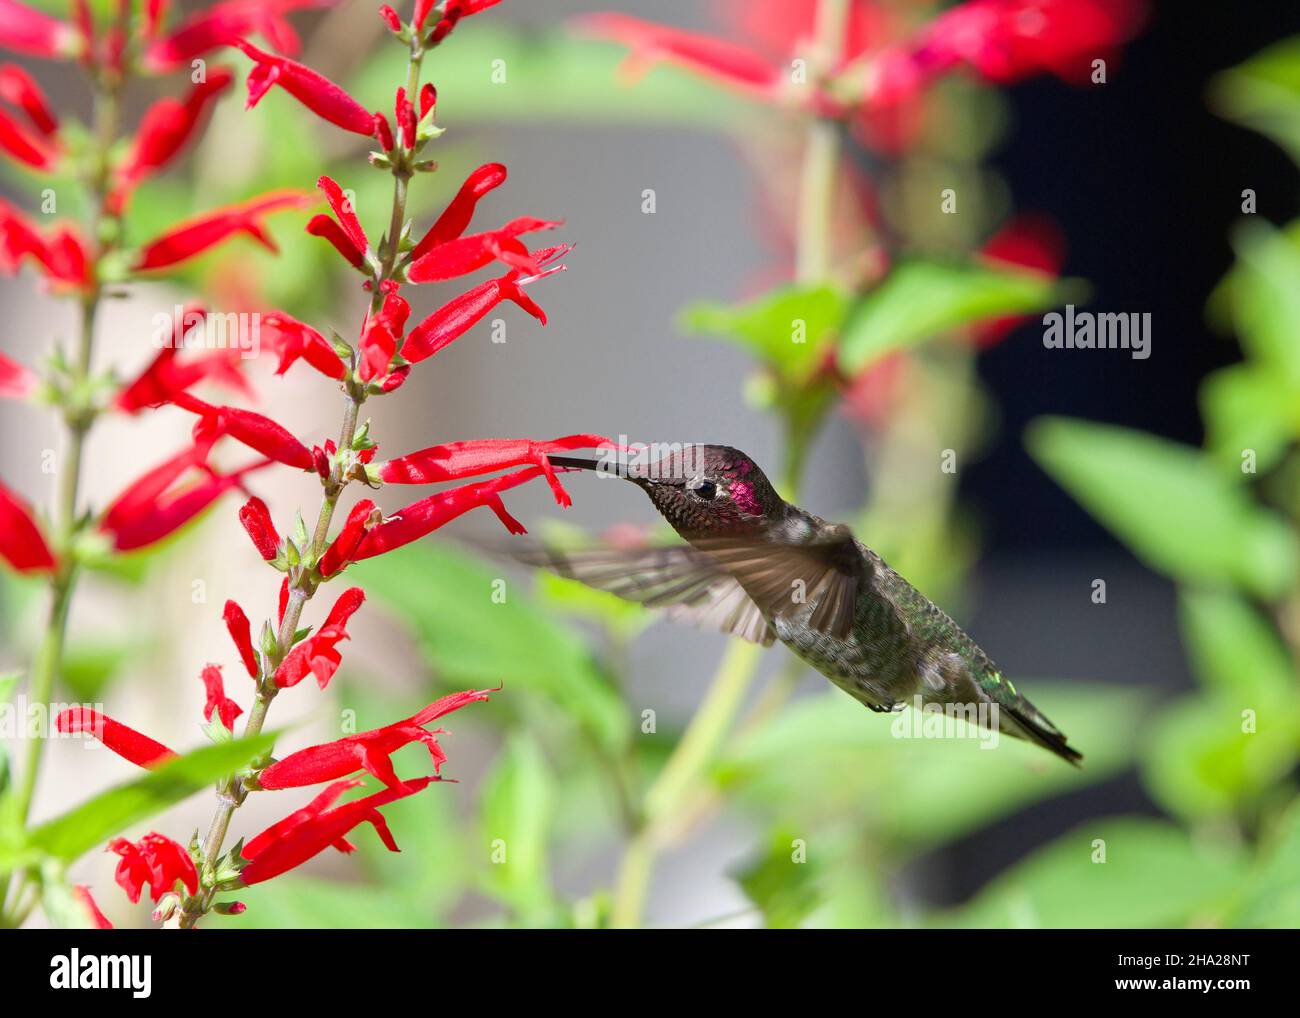 Anna's Hummingbird drinking nectar from vibrant red pineapple sage flowers. Beauty in nature. Stock Photo